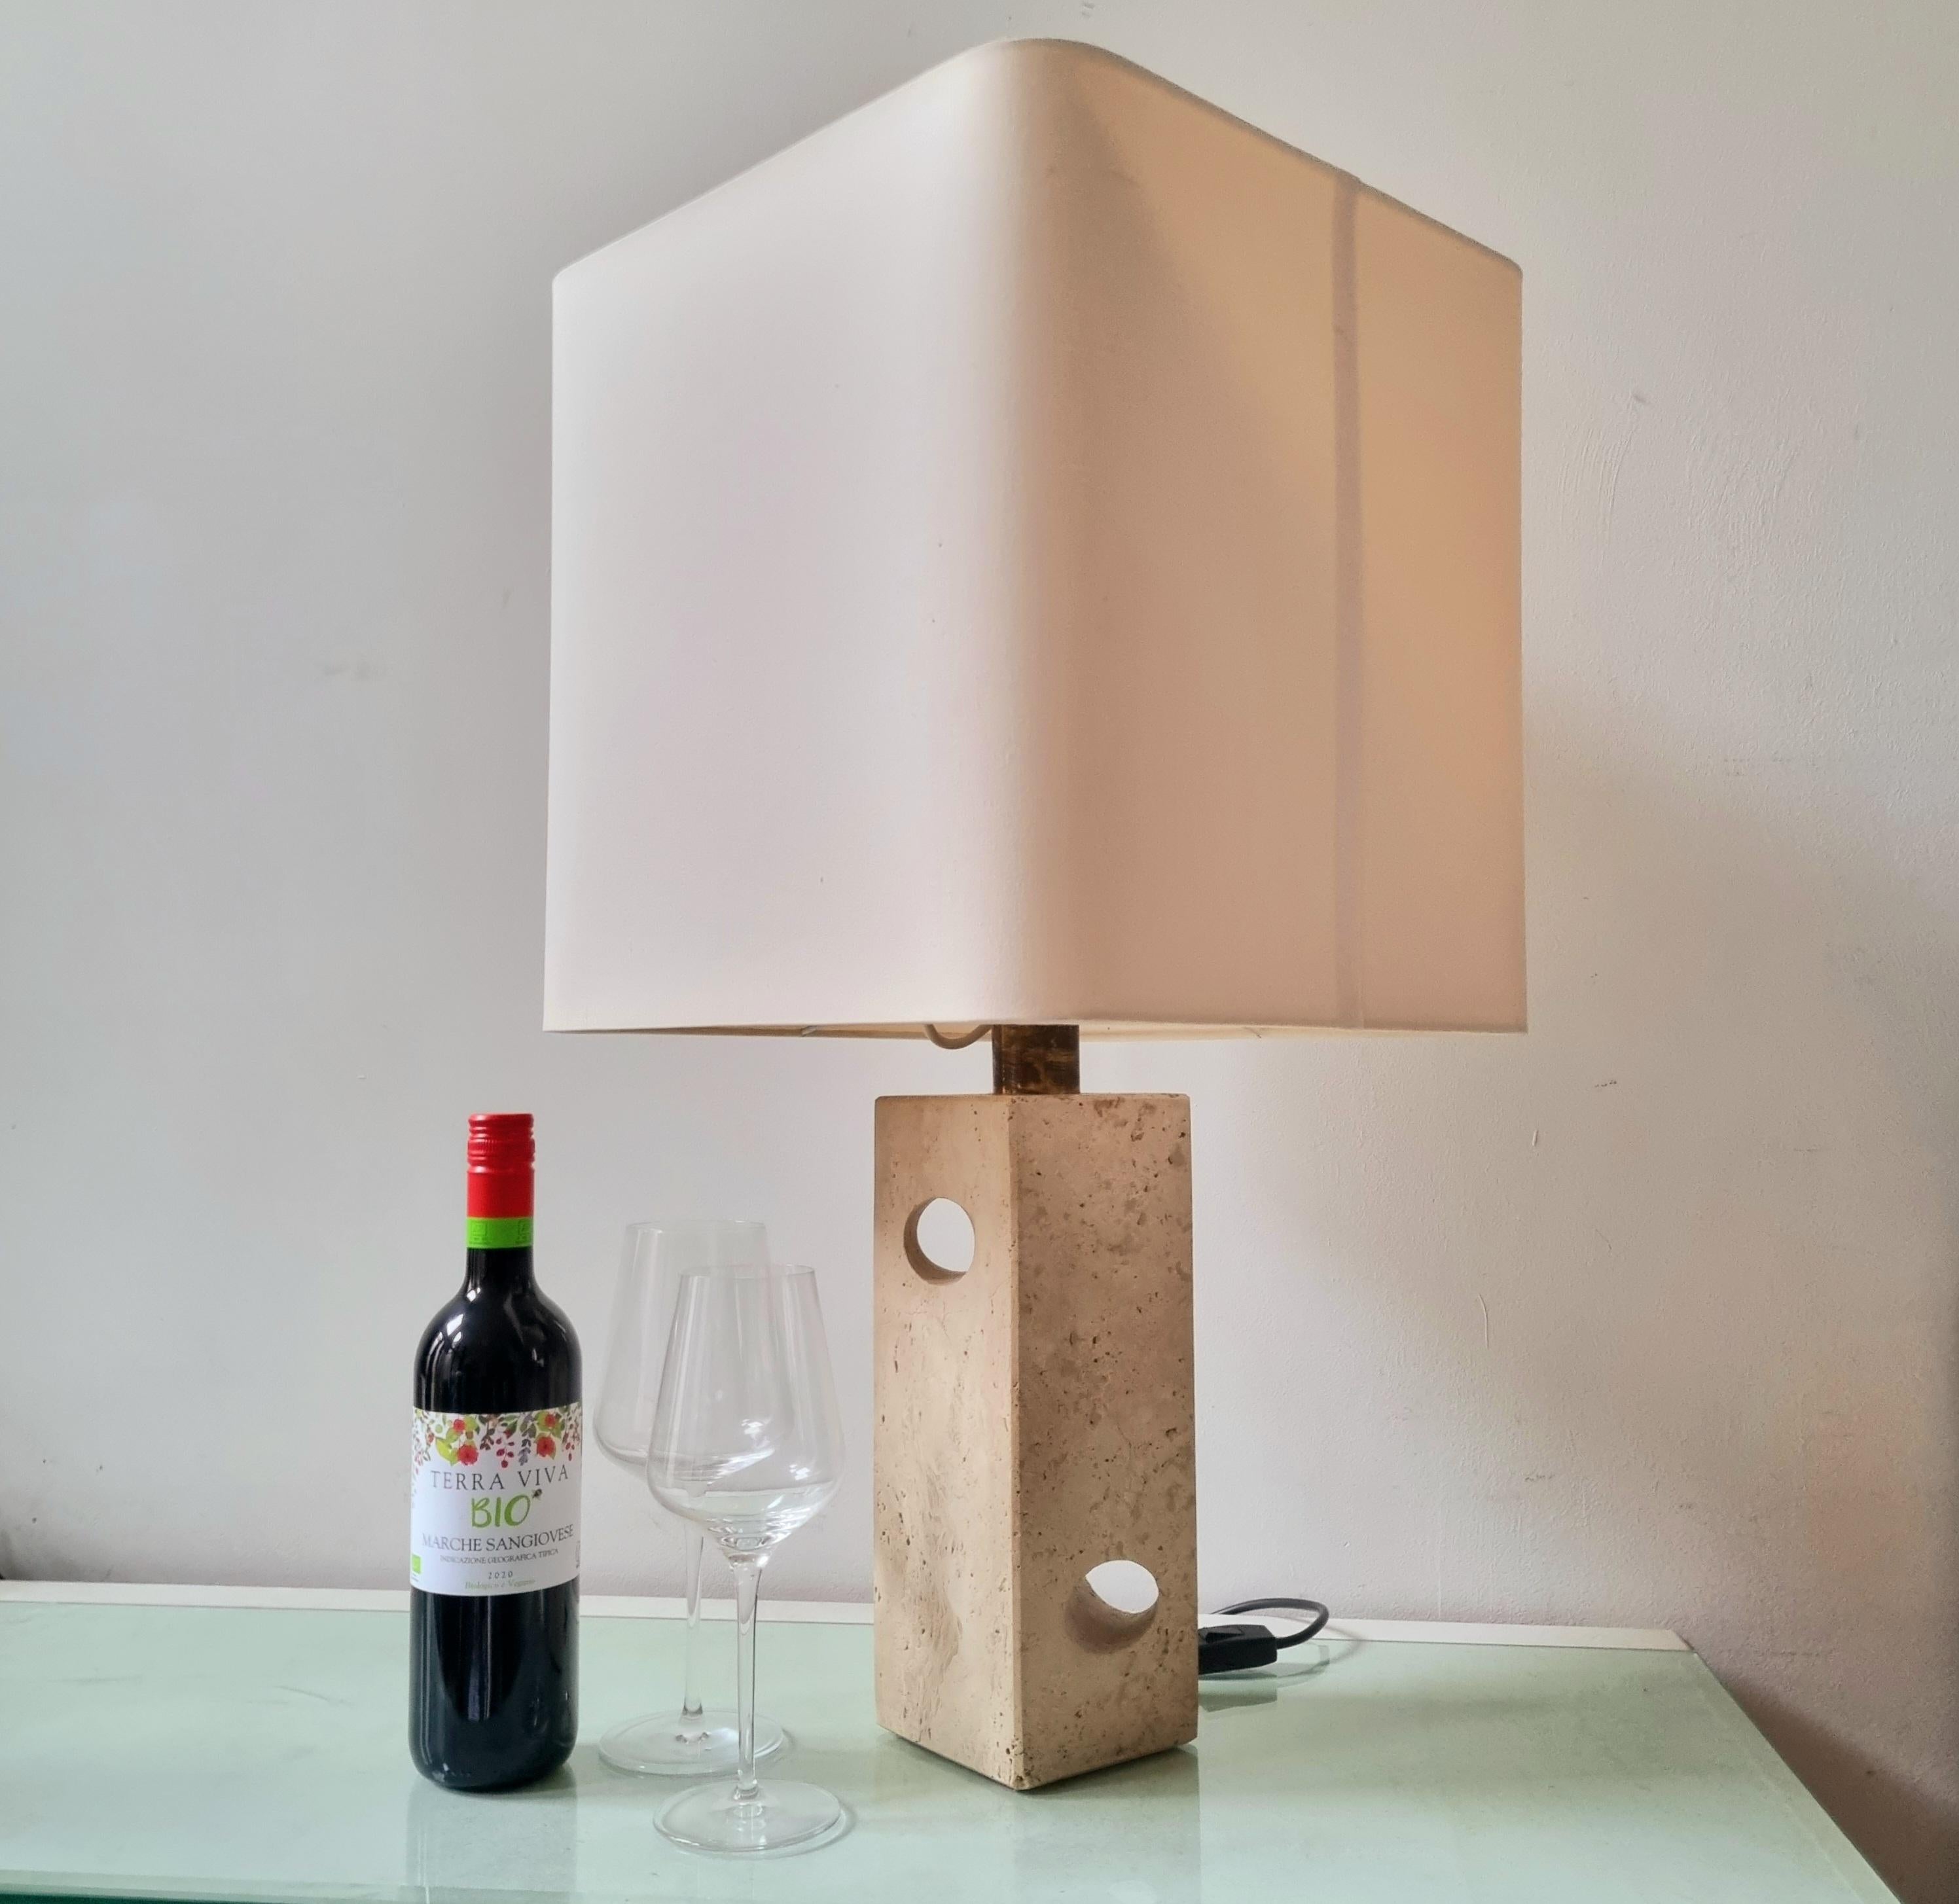 Circa 1970. A very elegant and heavy table lamp by Fratelli Mannelli or in the style of, the renowned Italian designer of travertine objects. It features a sculptural travertine base, brass plated lamp holder and an off-white fabric shade. The lamp